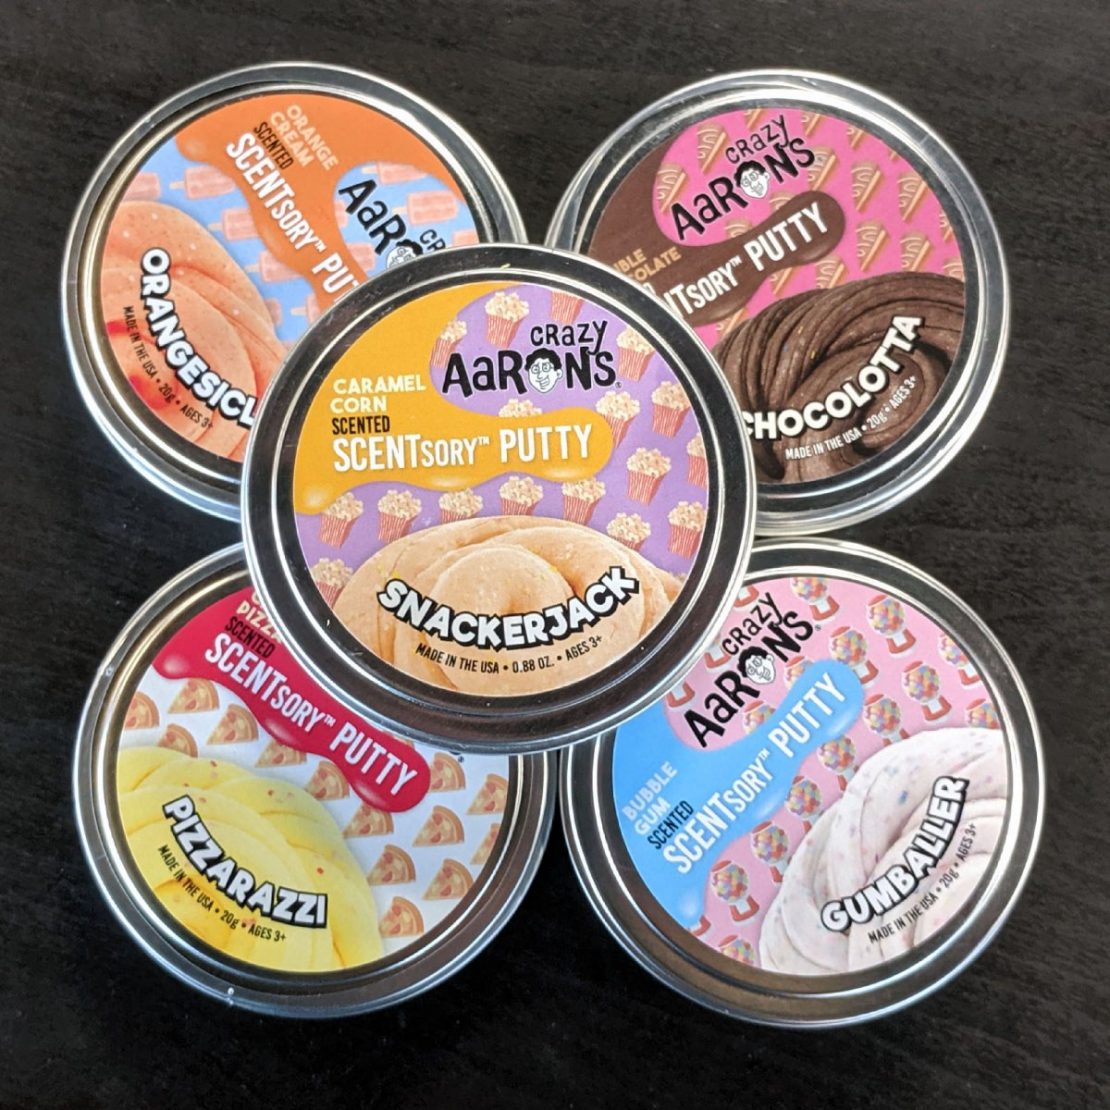 SCENTsory Putty from Crazy Aaron's Thinking Putty